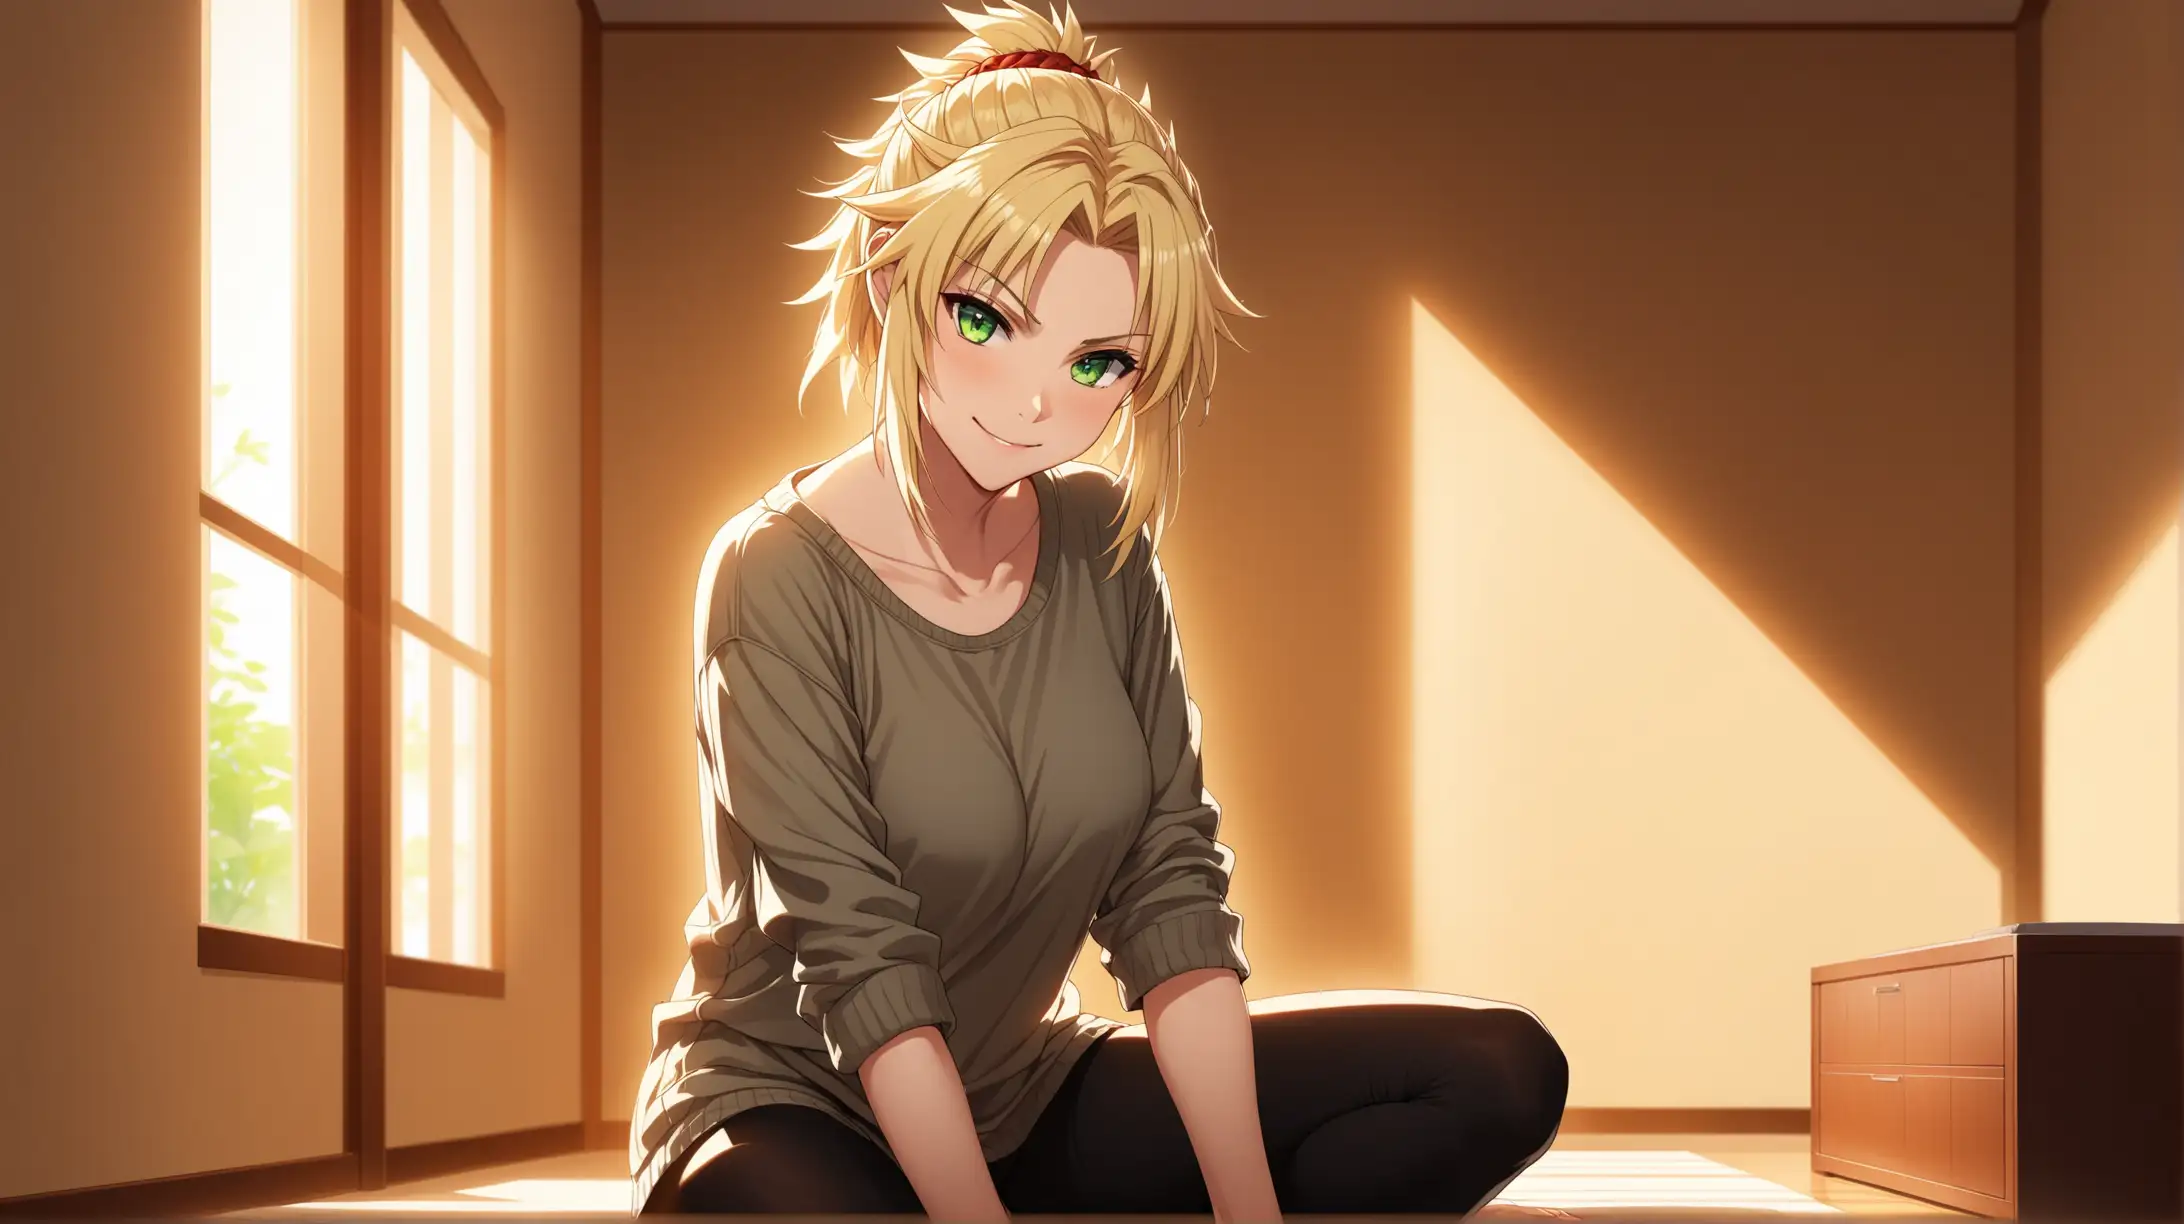 Seductive Mordred GreenEyed Charm in Casual Ambiance